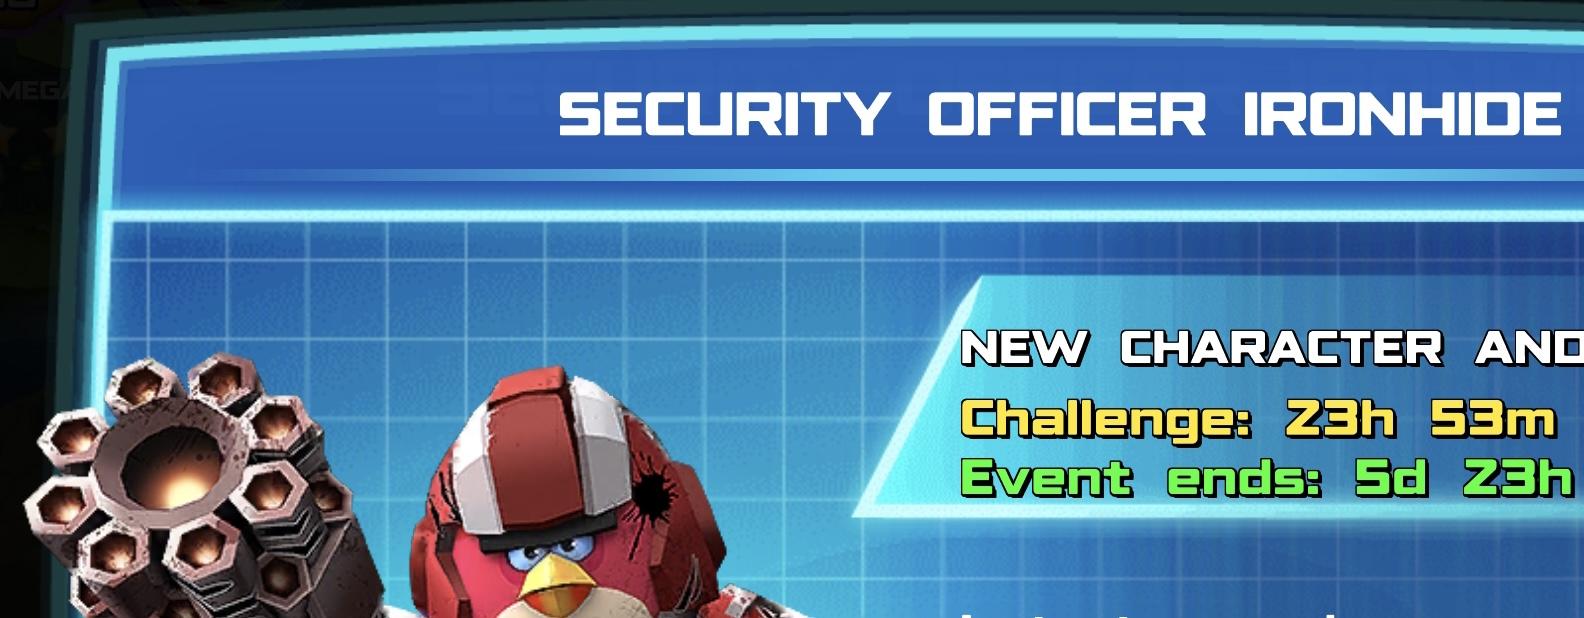 The event banner for Security Officer Ironhide